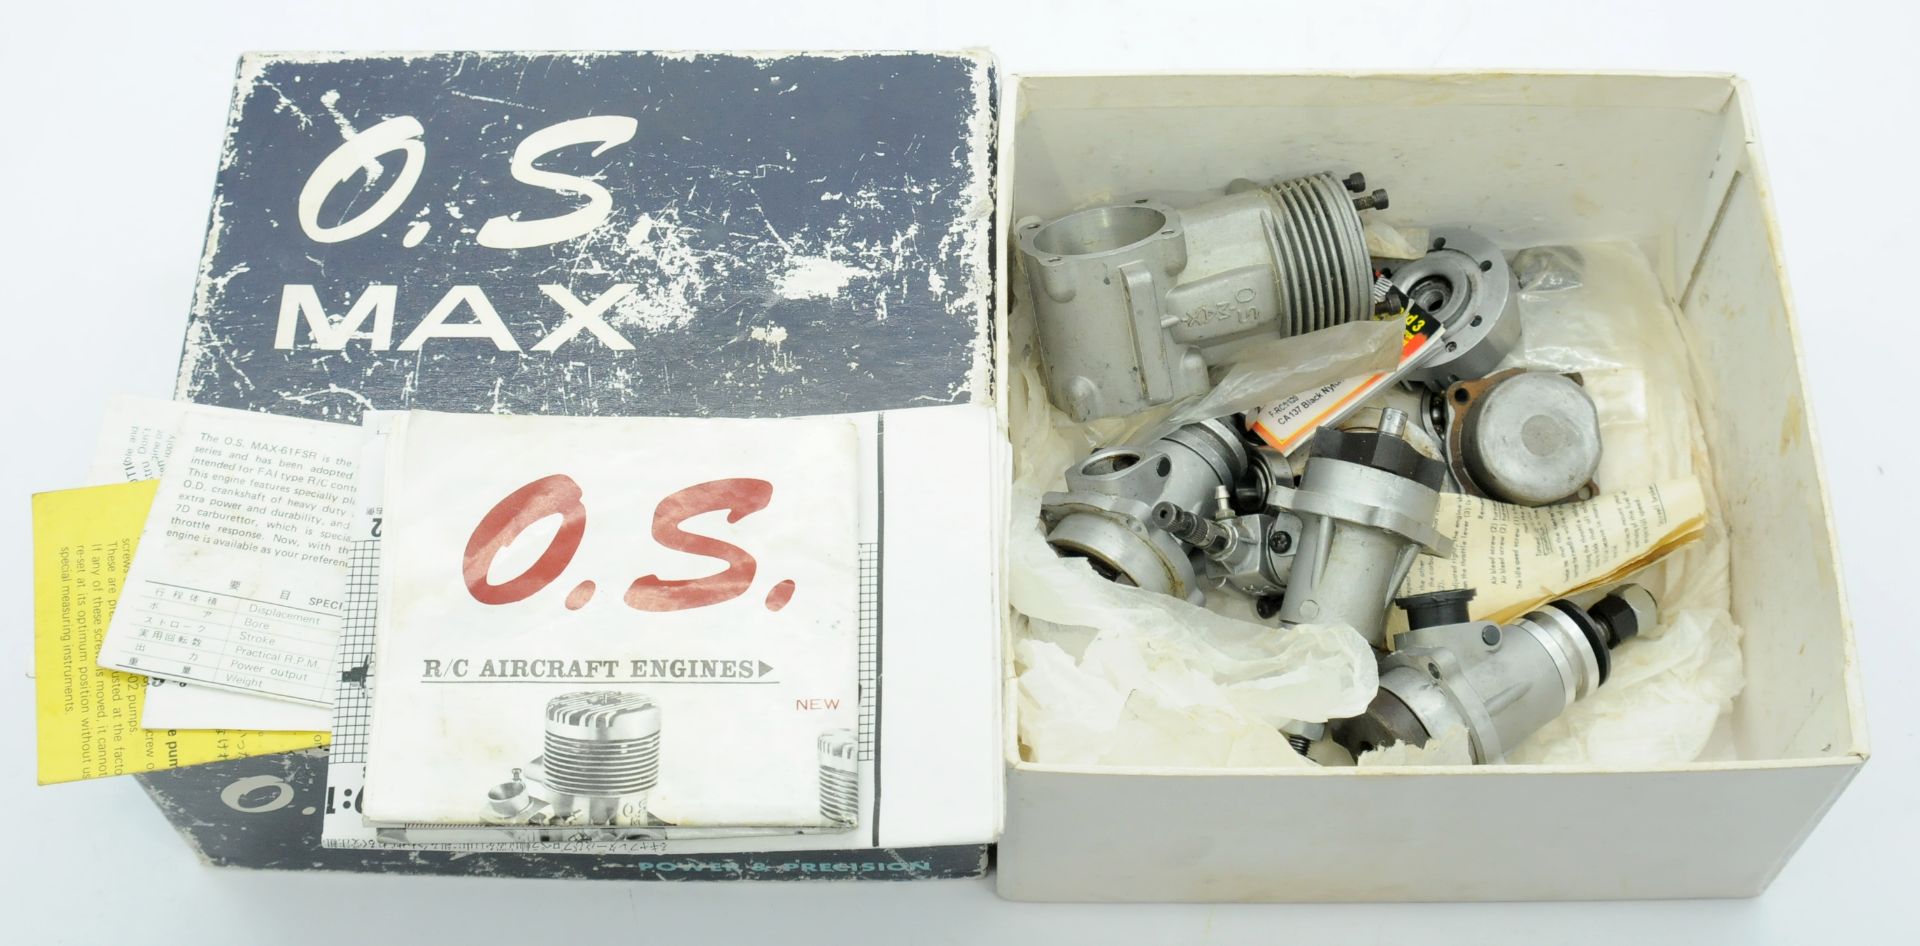 OS Max a boxed 61F SR (GS A-2)Propeller Reduction Gear Engine which is incomplete along with spar...